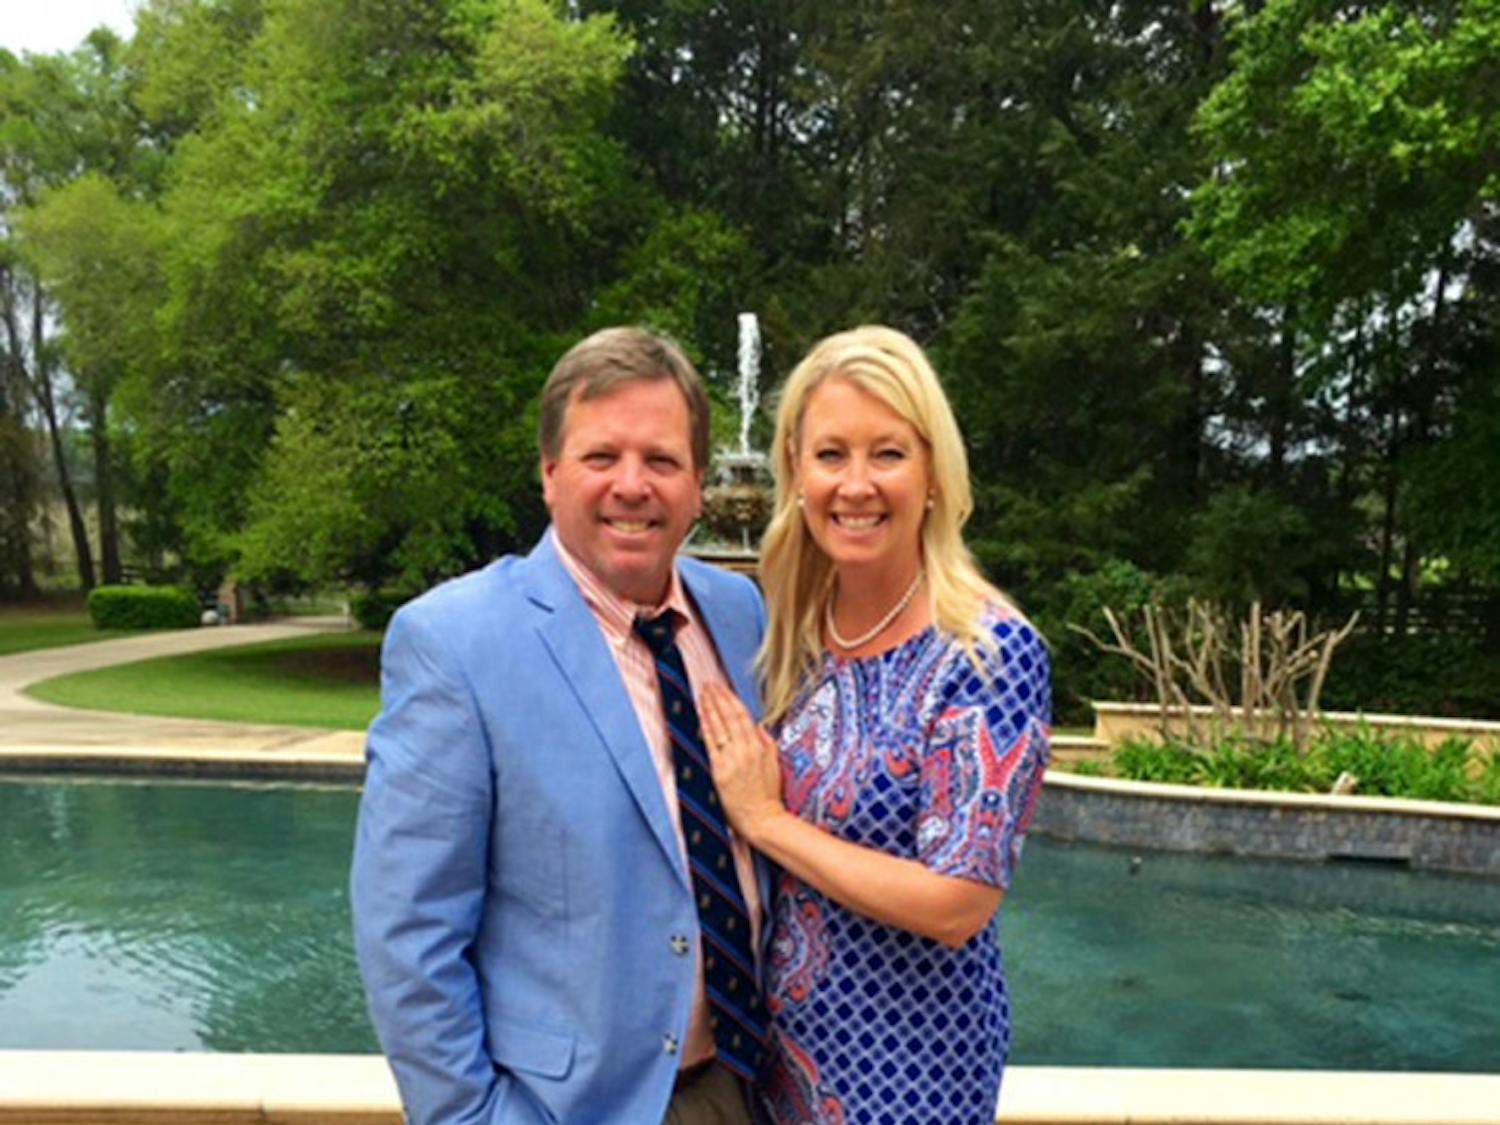 Coach Jim McElwain and Karen McElwain before attending Easter Sunday service last month. The McElwains have been in Gainesville for a year now, with a 10-4 regular season record in their first season with the Gators.